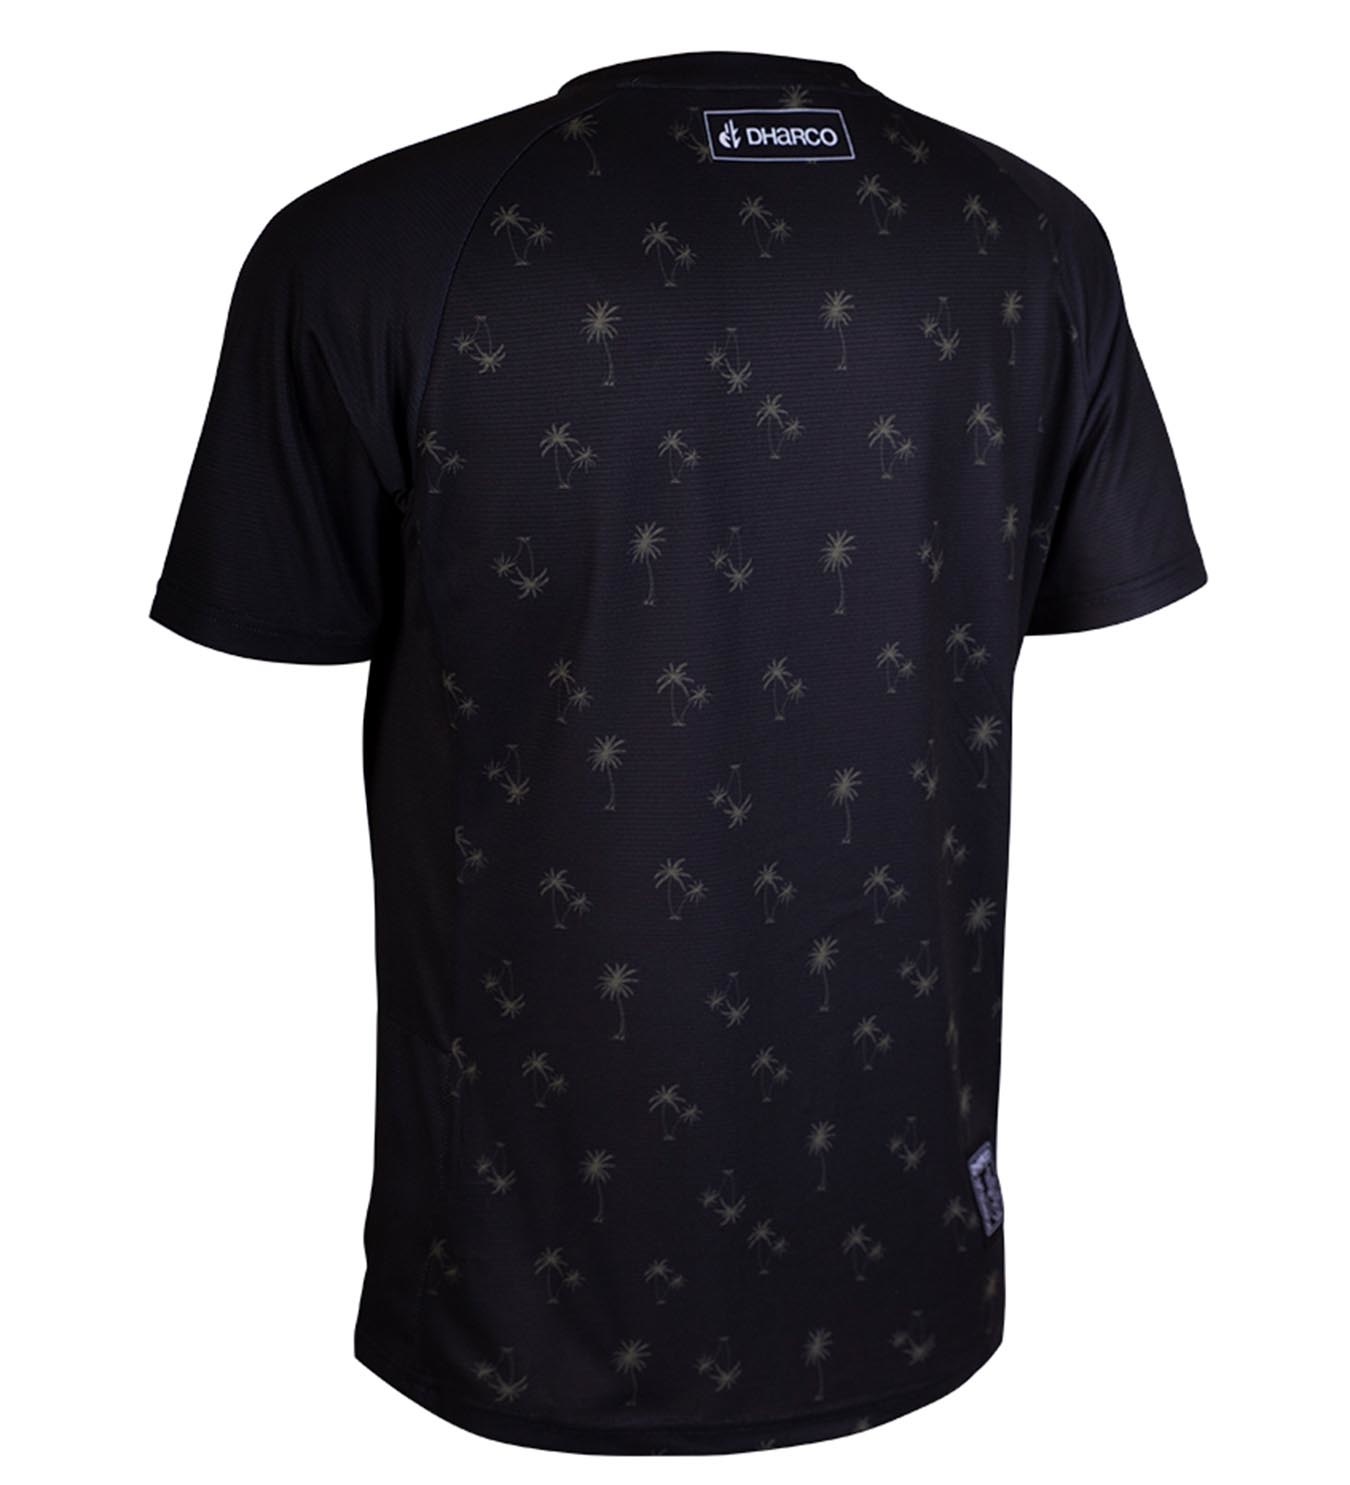 DHaRCO DHaRCO Men's SS Jersey